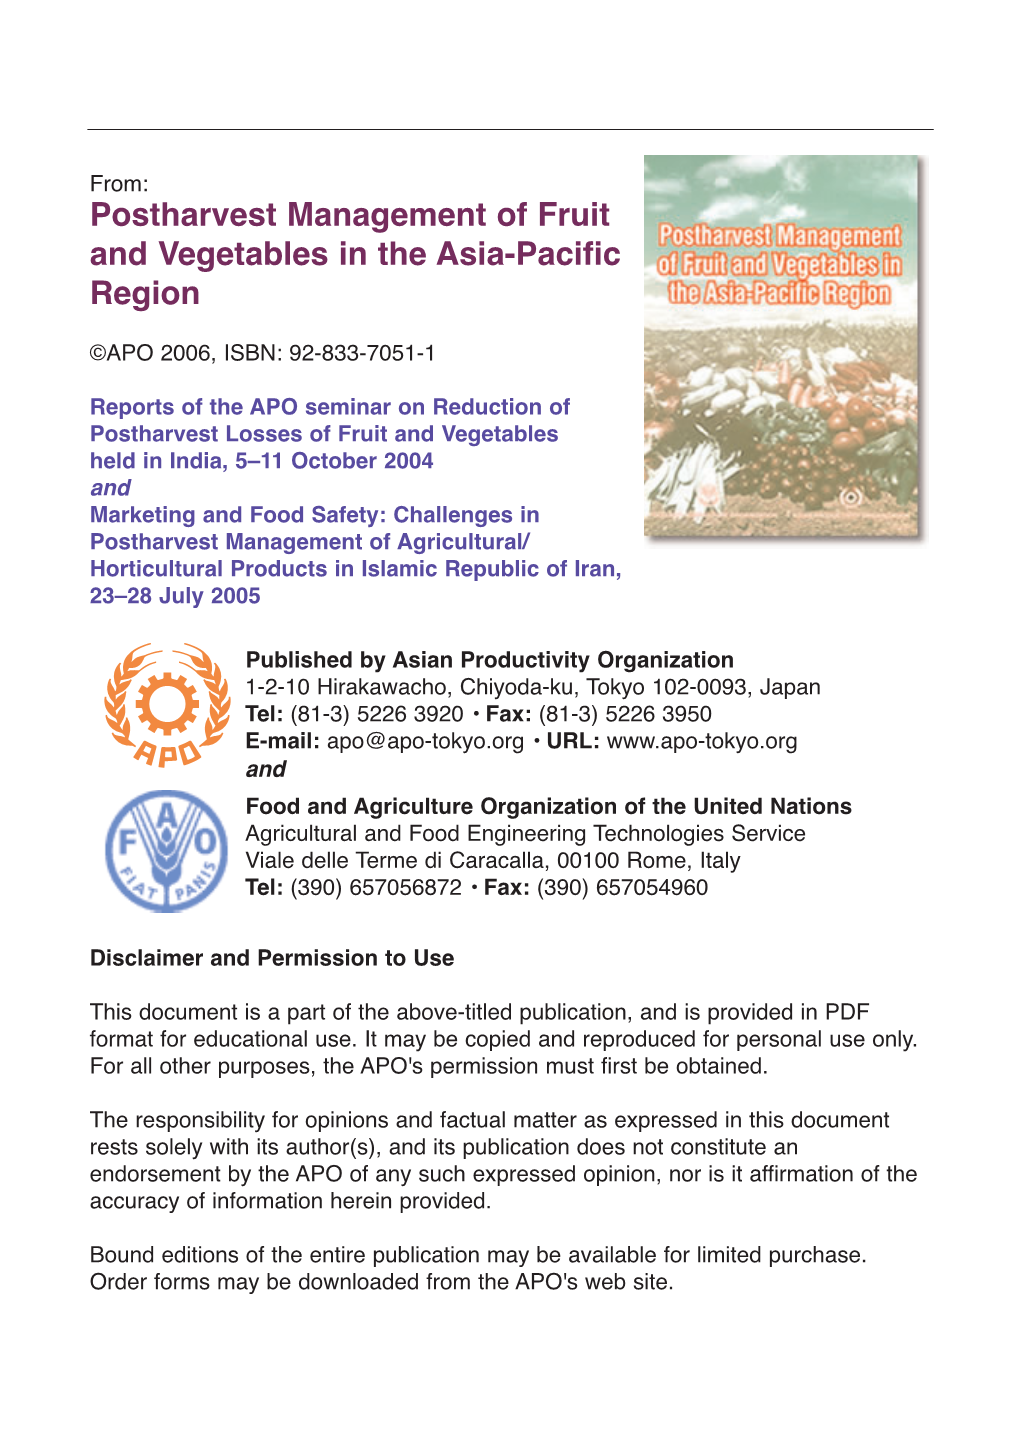 Postharvest Management of Fruit and Vegetables in the Asia-Pacific Region